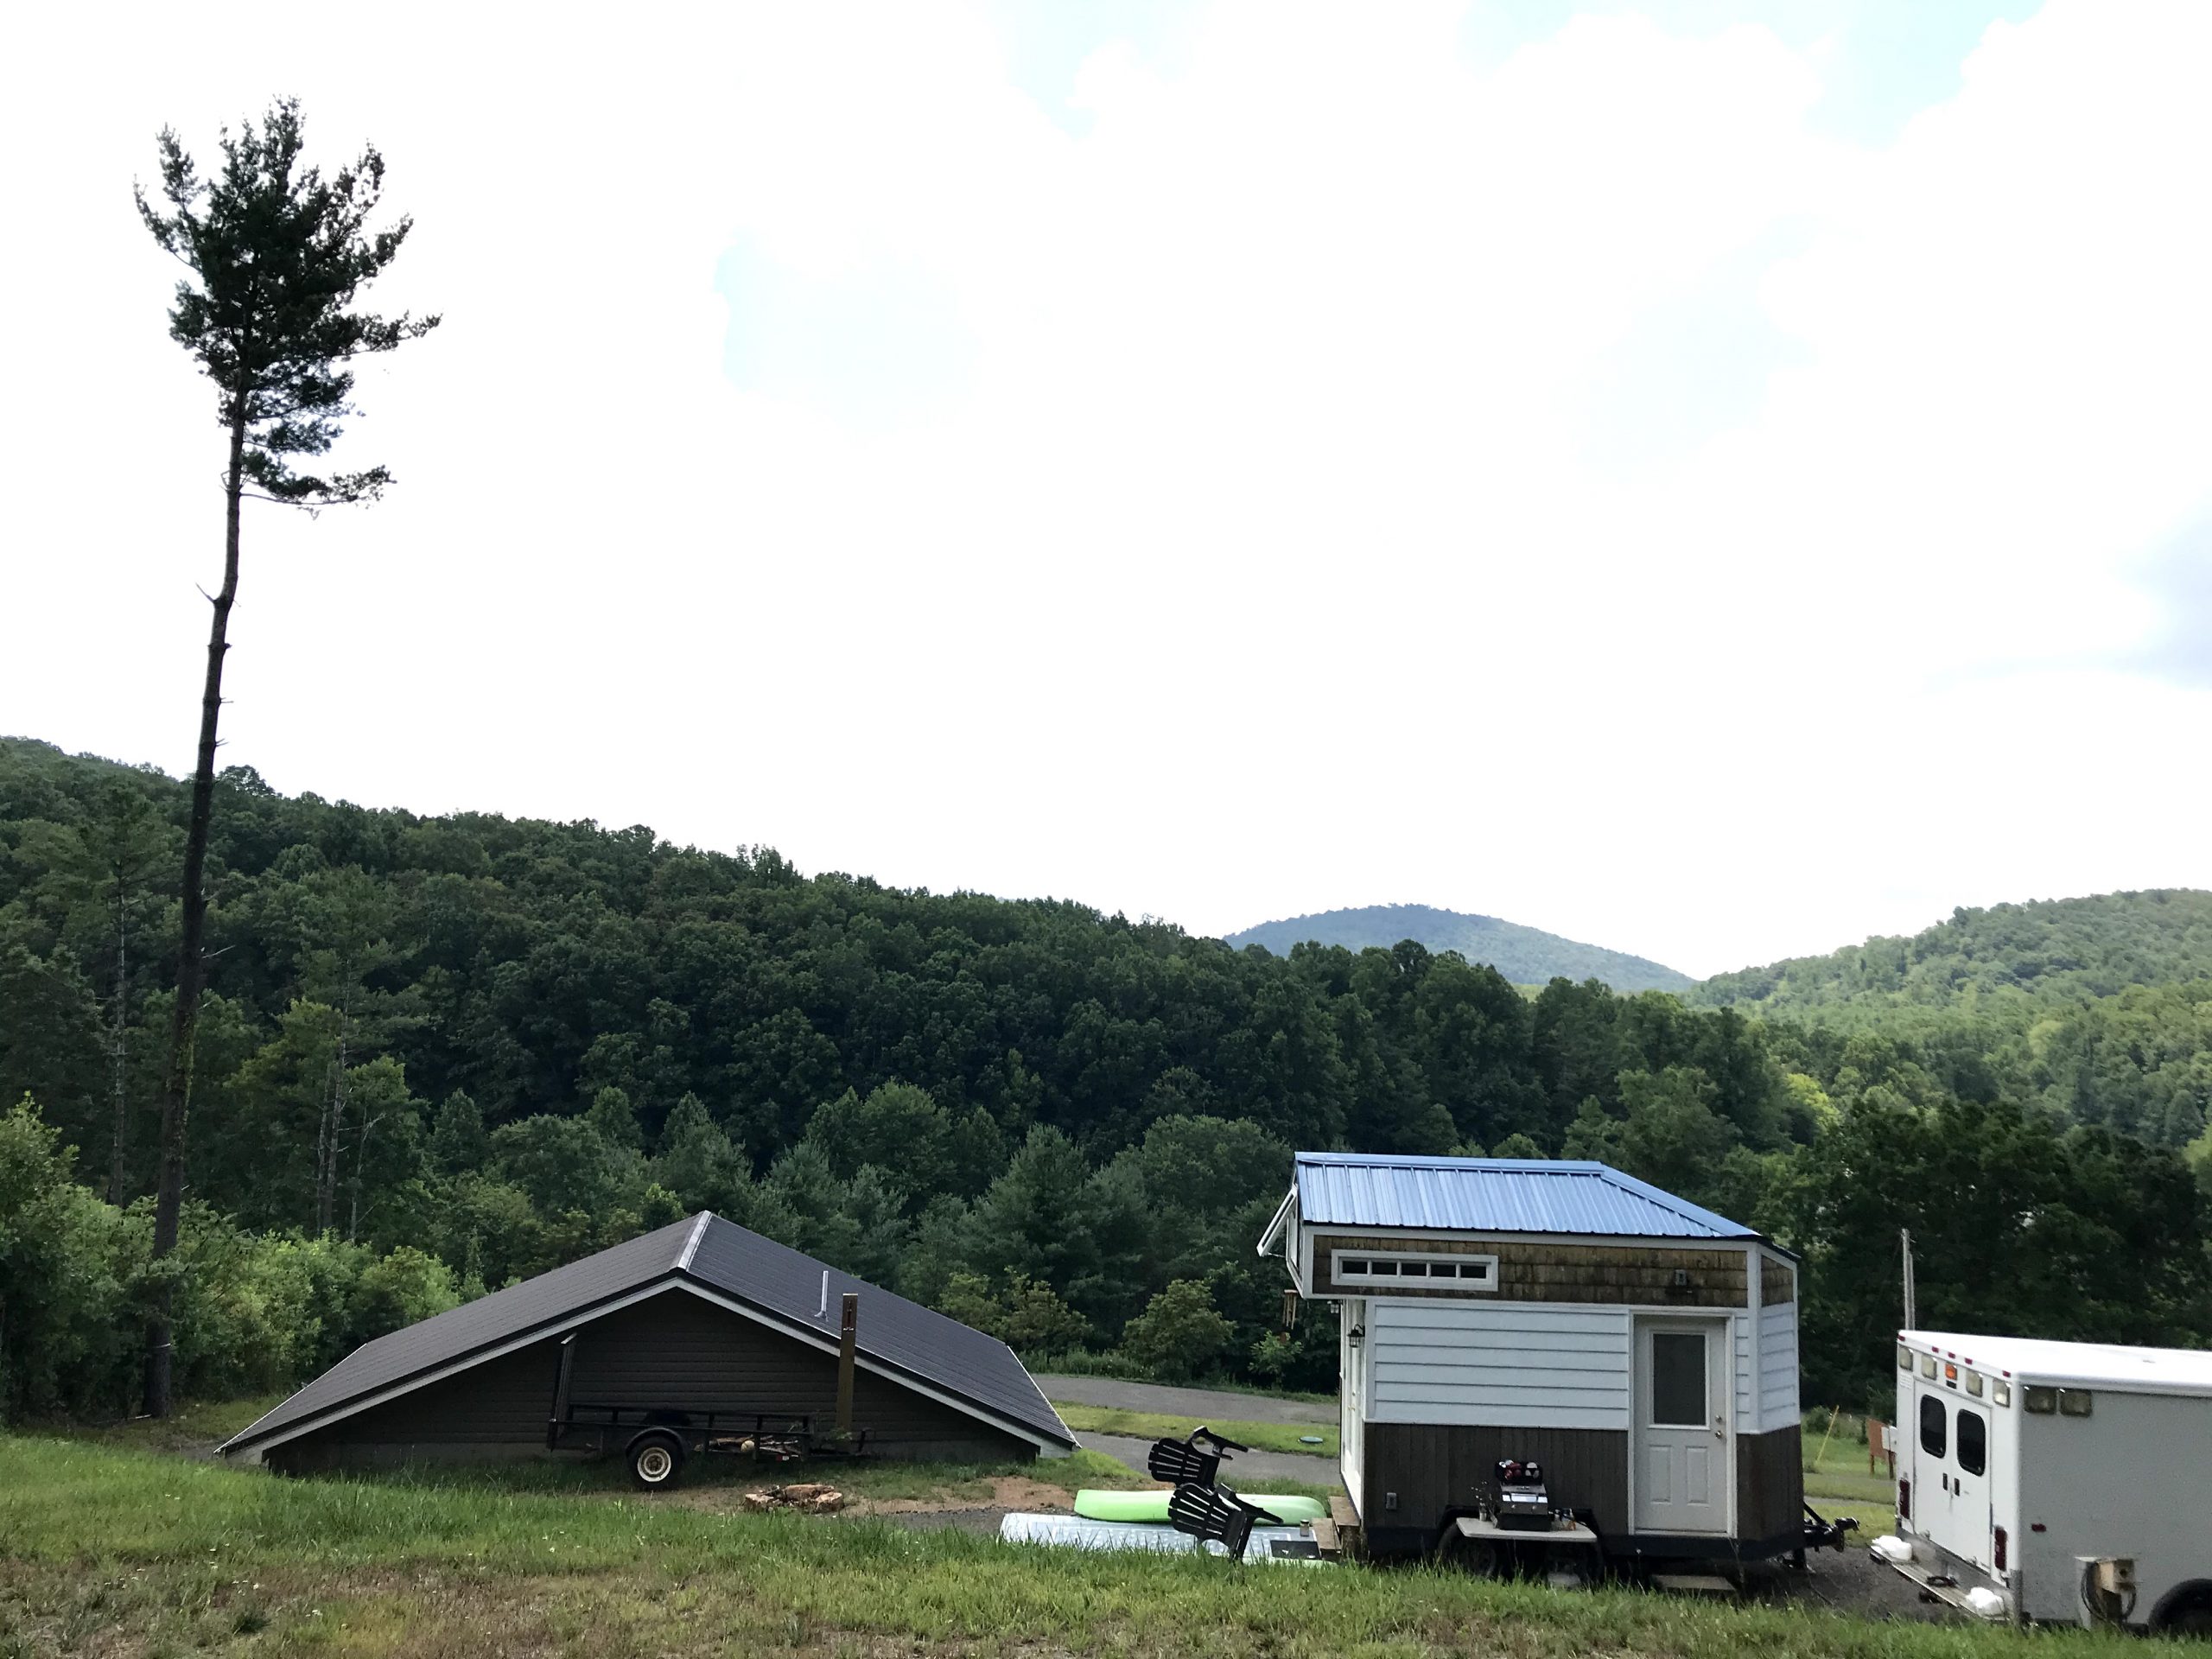 Chestnut Lane – Space for RV or Tiny Home